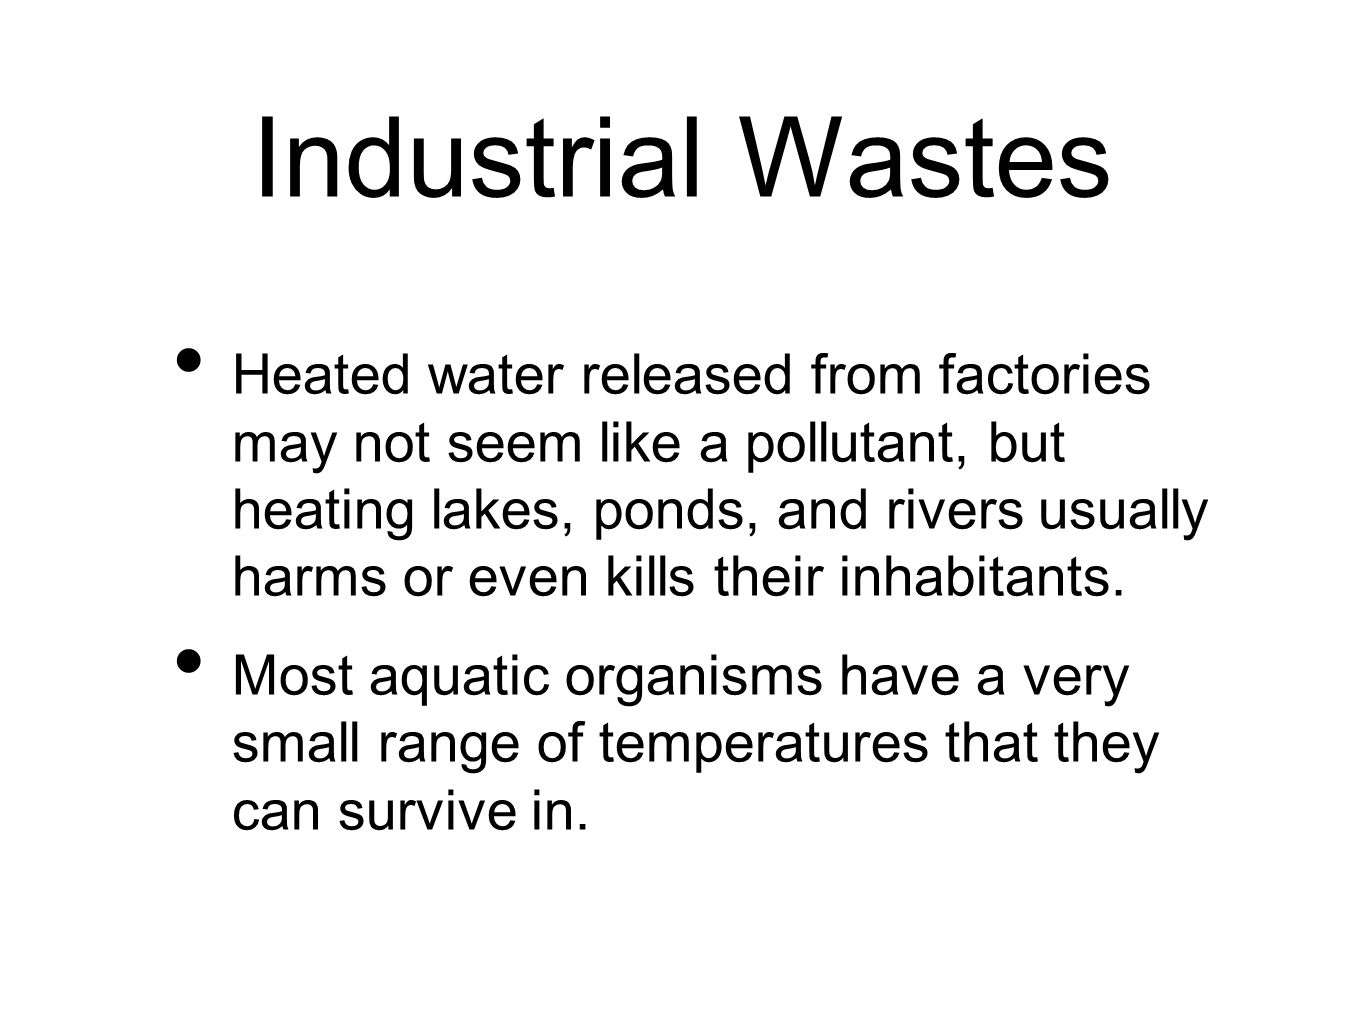 Industrial Wastes Heated water released from factories may not seem like a pollutant, but heating lakes, ponds, and rivers usually harms or even kills their inhabitants.